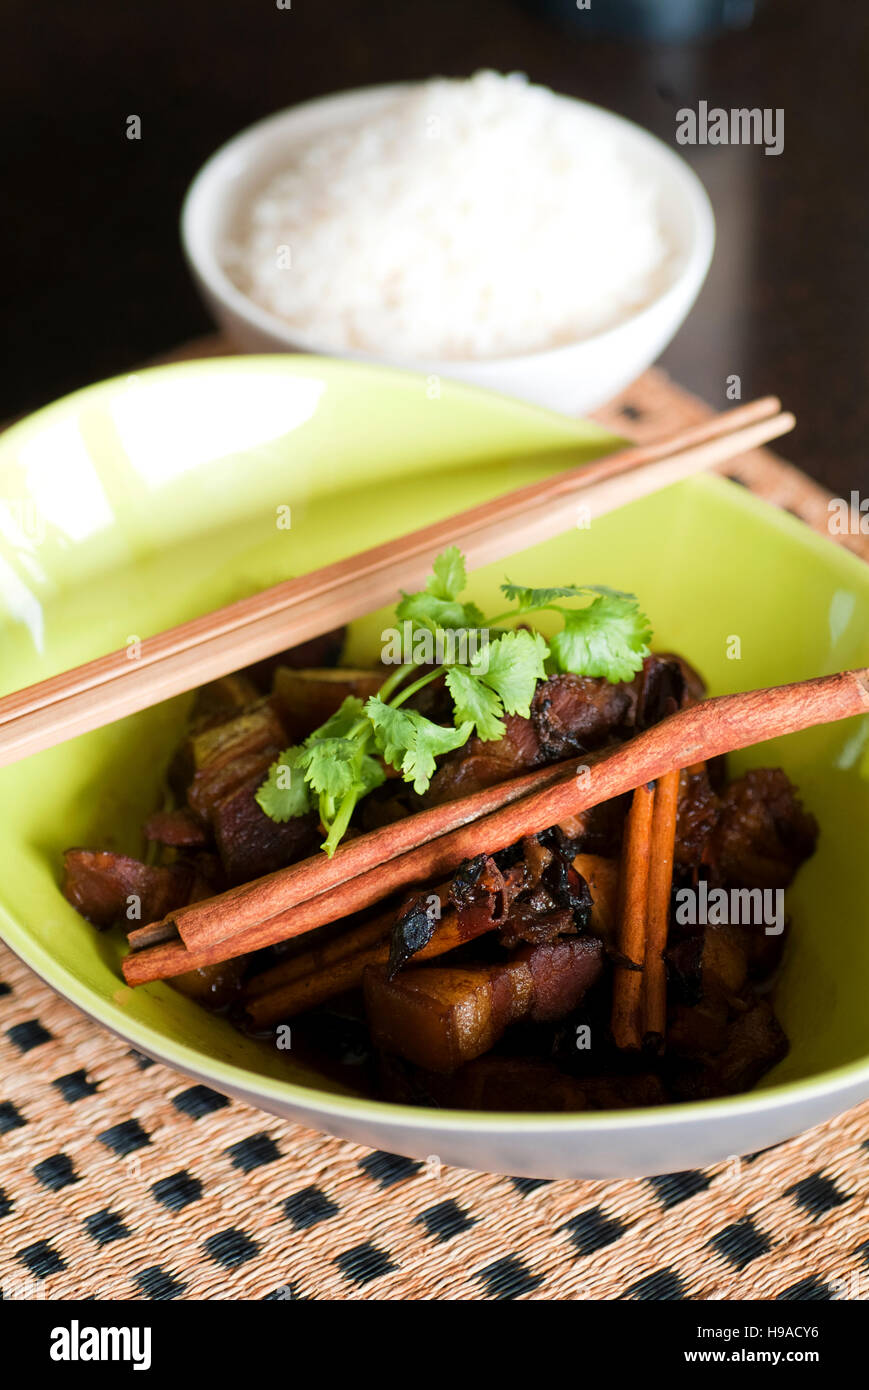 Moo hong, braised pork belly with Chinese herbs and cinnamon, a Baba-Nonya cuisine dish brought to Phuket by Hokkien Chinese immigrants. Thailand. Stock Photo